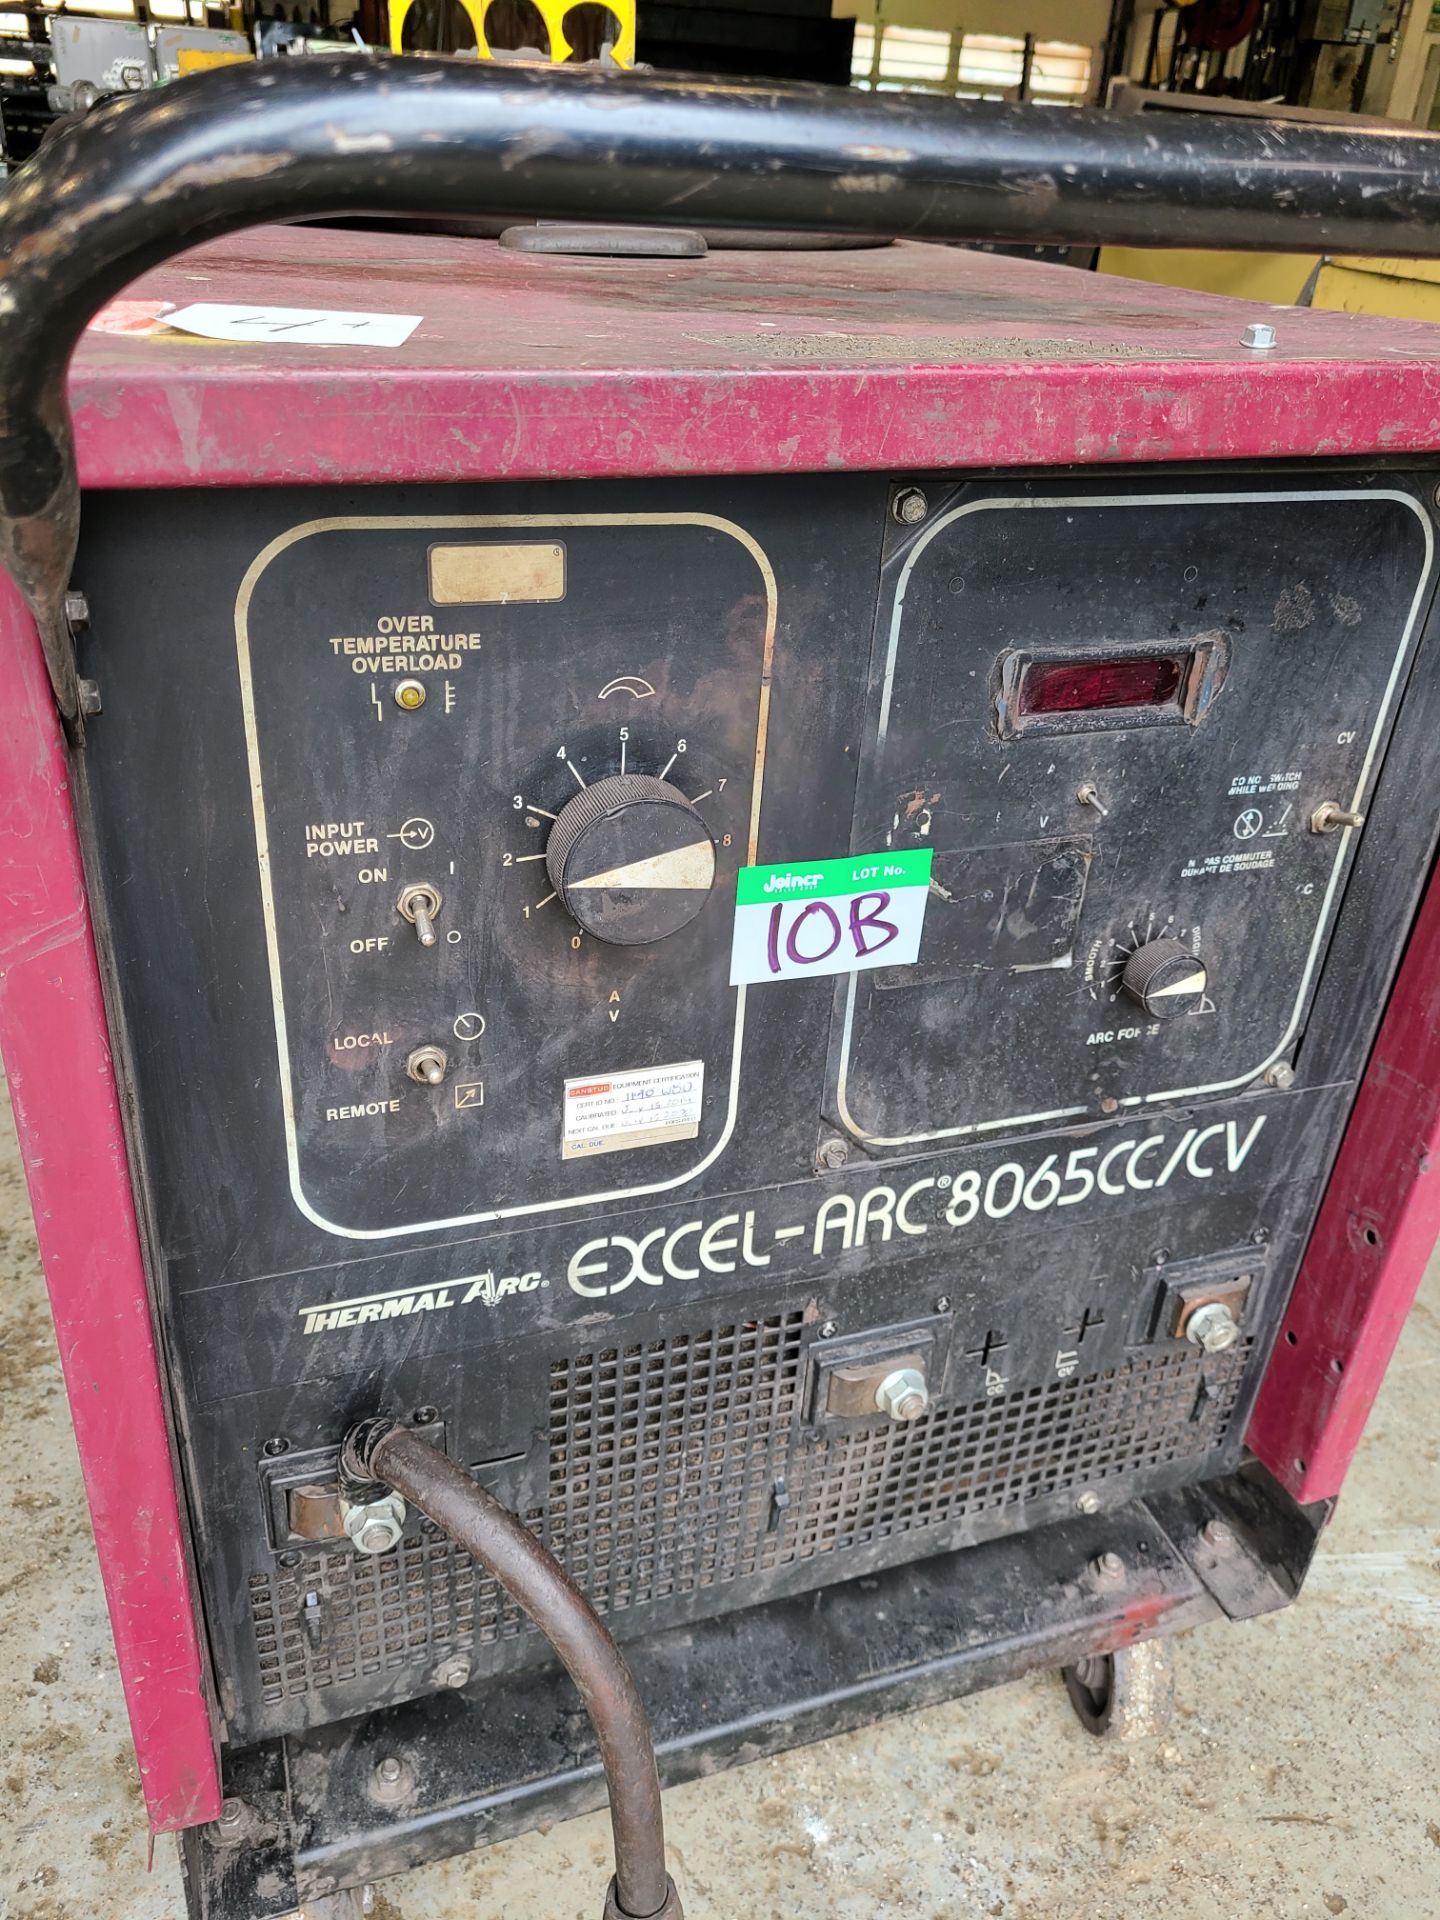 THERMAL ARC EXCEL-ARC 8065 CC/CV WELDER W/ THERMAL ARC 2410 WIRE FEEDER, 230/460/575 - Image 2 of 3